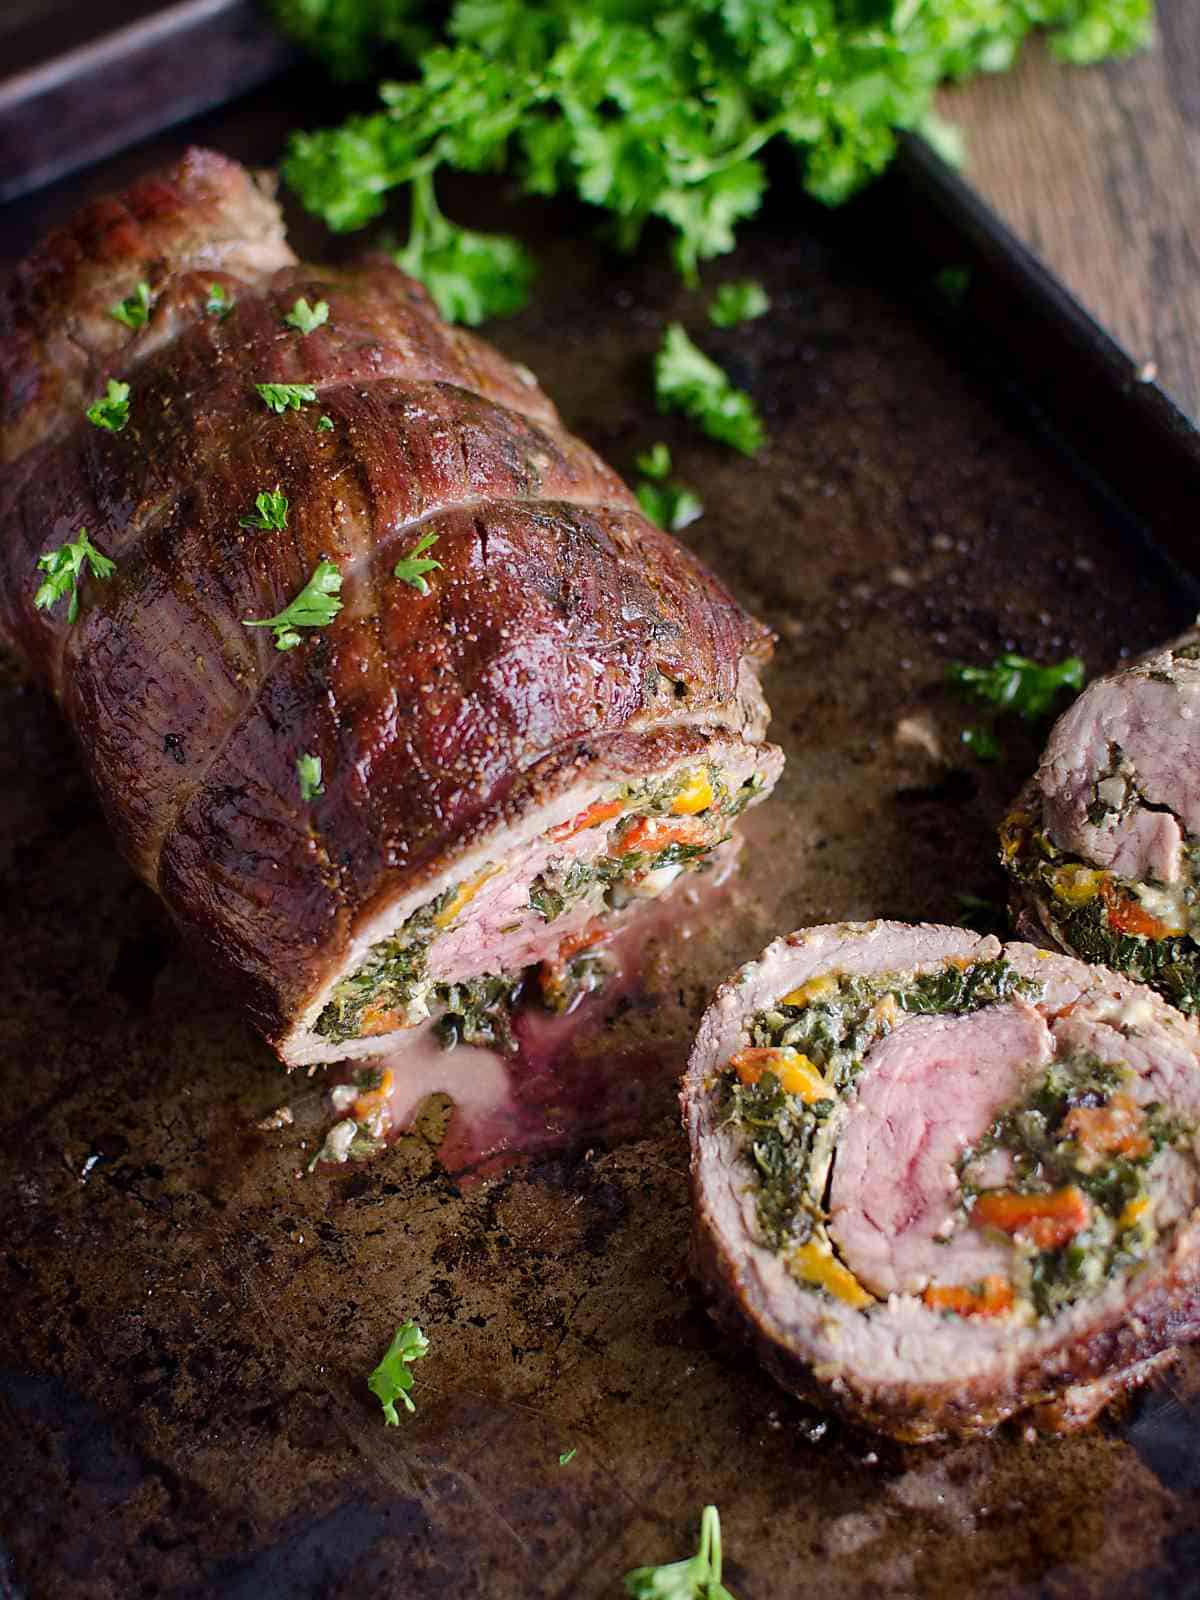 Flank steak roll stuffed with spinach peppers and blue cheese, sliced like pinwheels